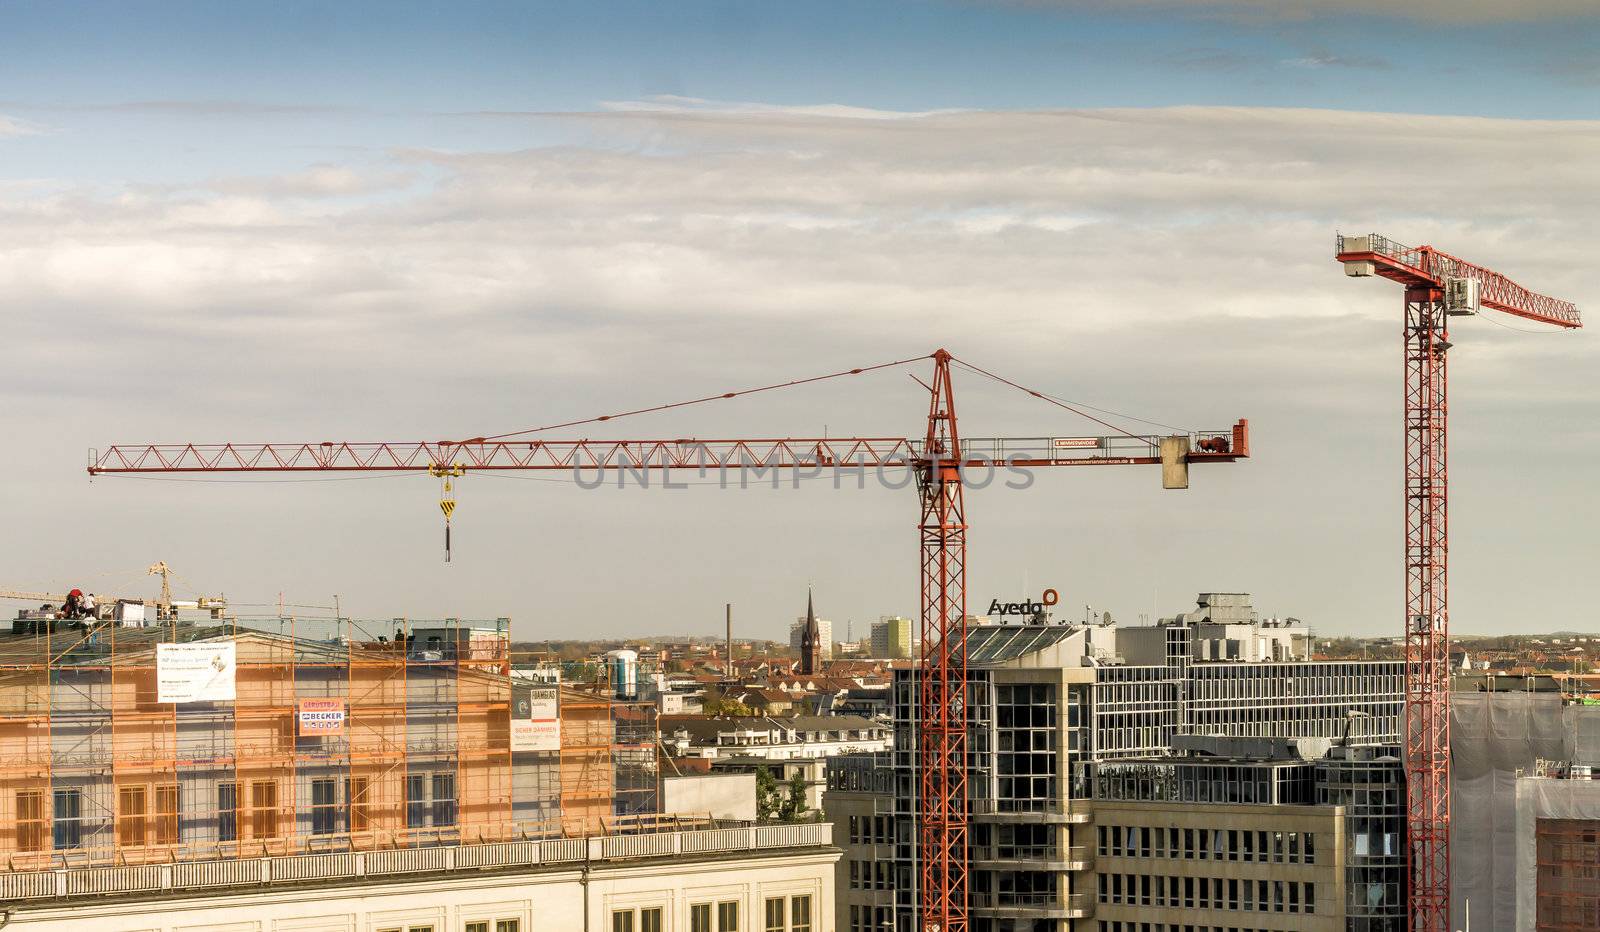 Leipzig, Saxony, Germany - October 21 2017: View over the city centre of Leipzig with construction cranes over the roofs of the city